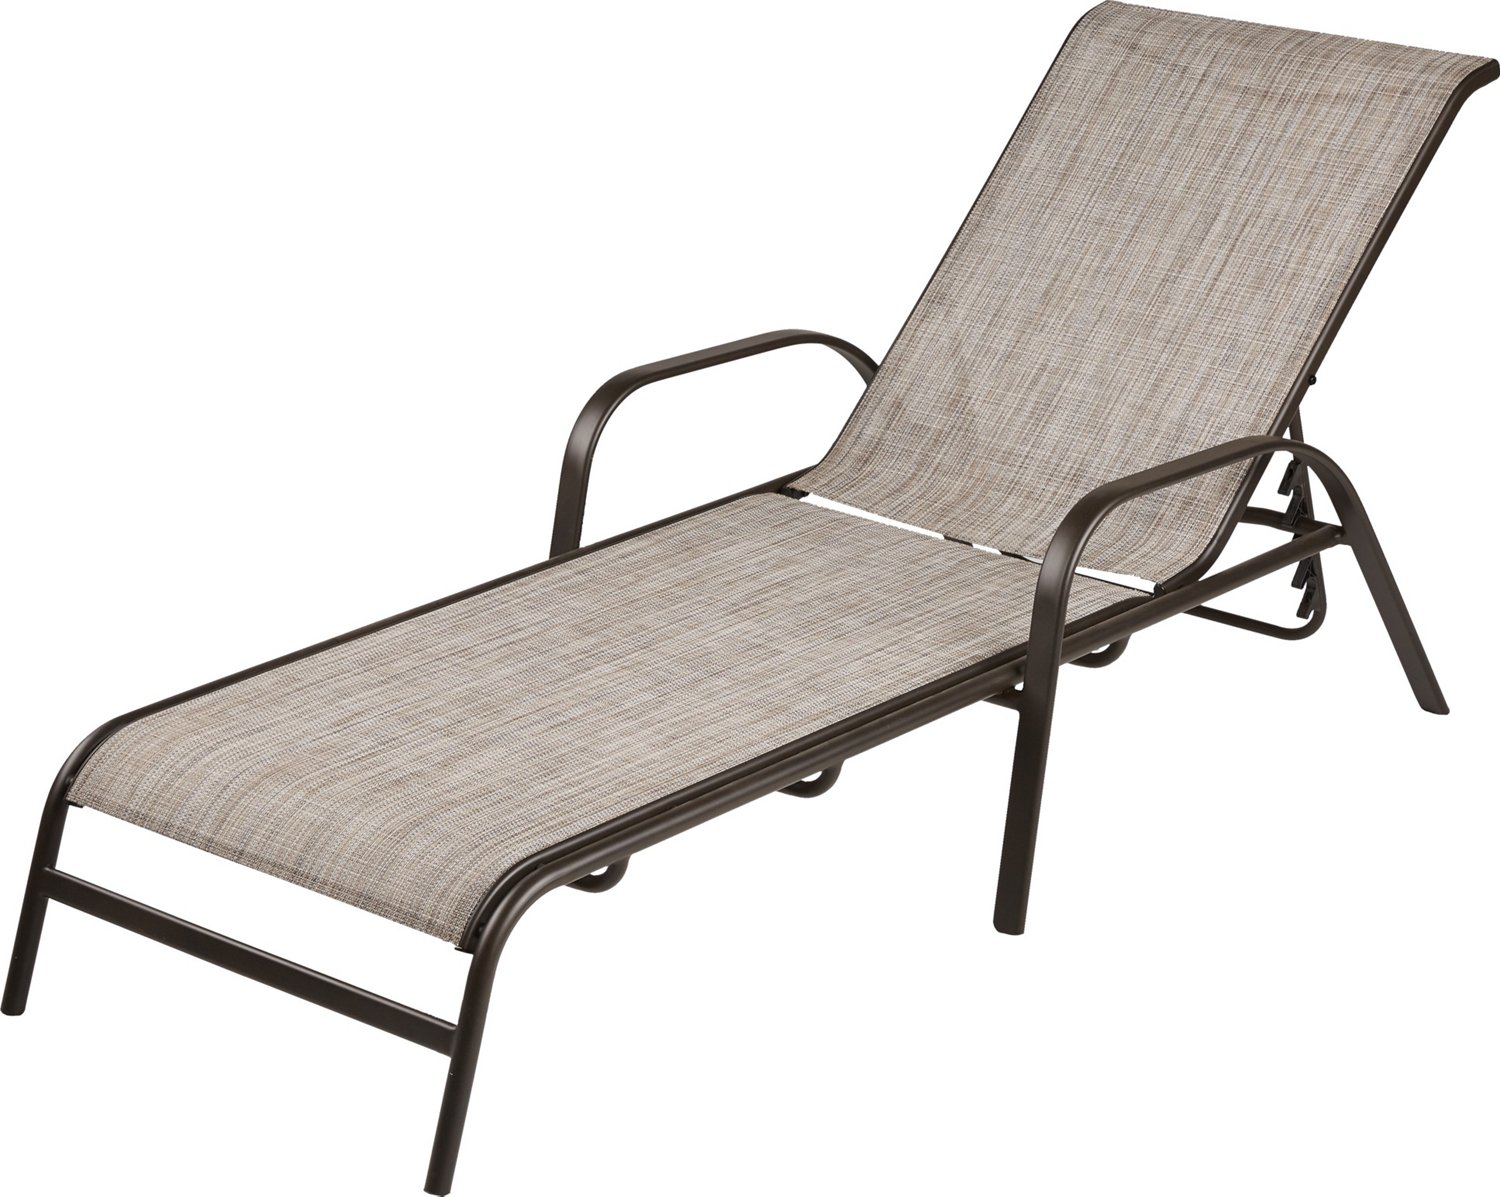 Chaise Lounge Chair Near Me Deals, 57% OFF | www.emanagreen.com